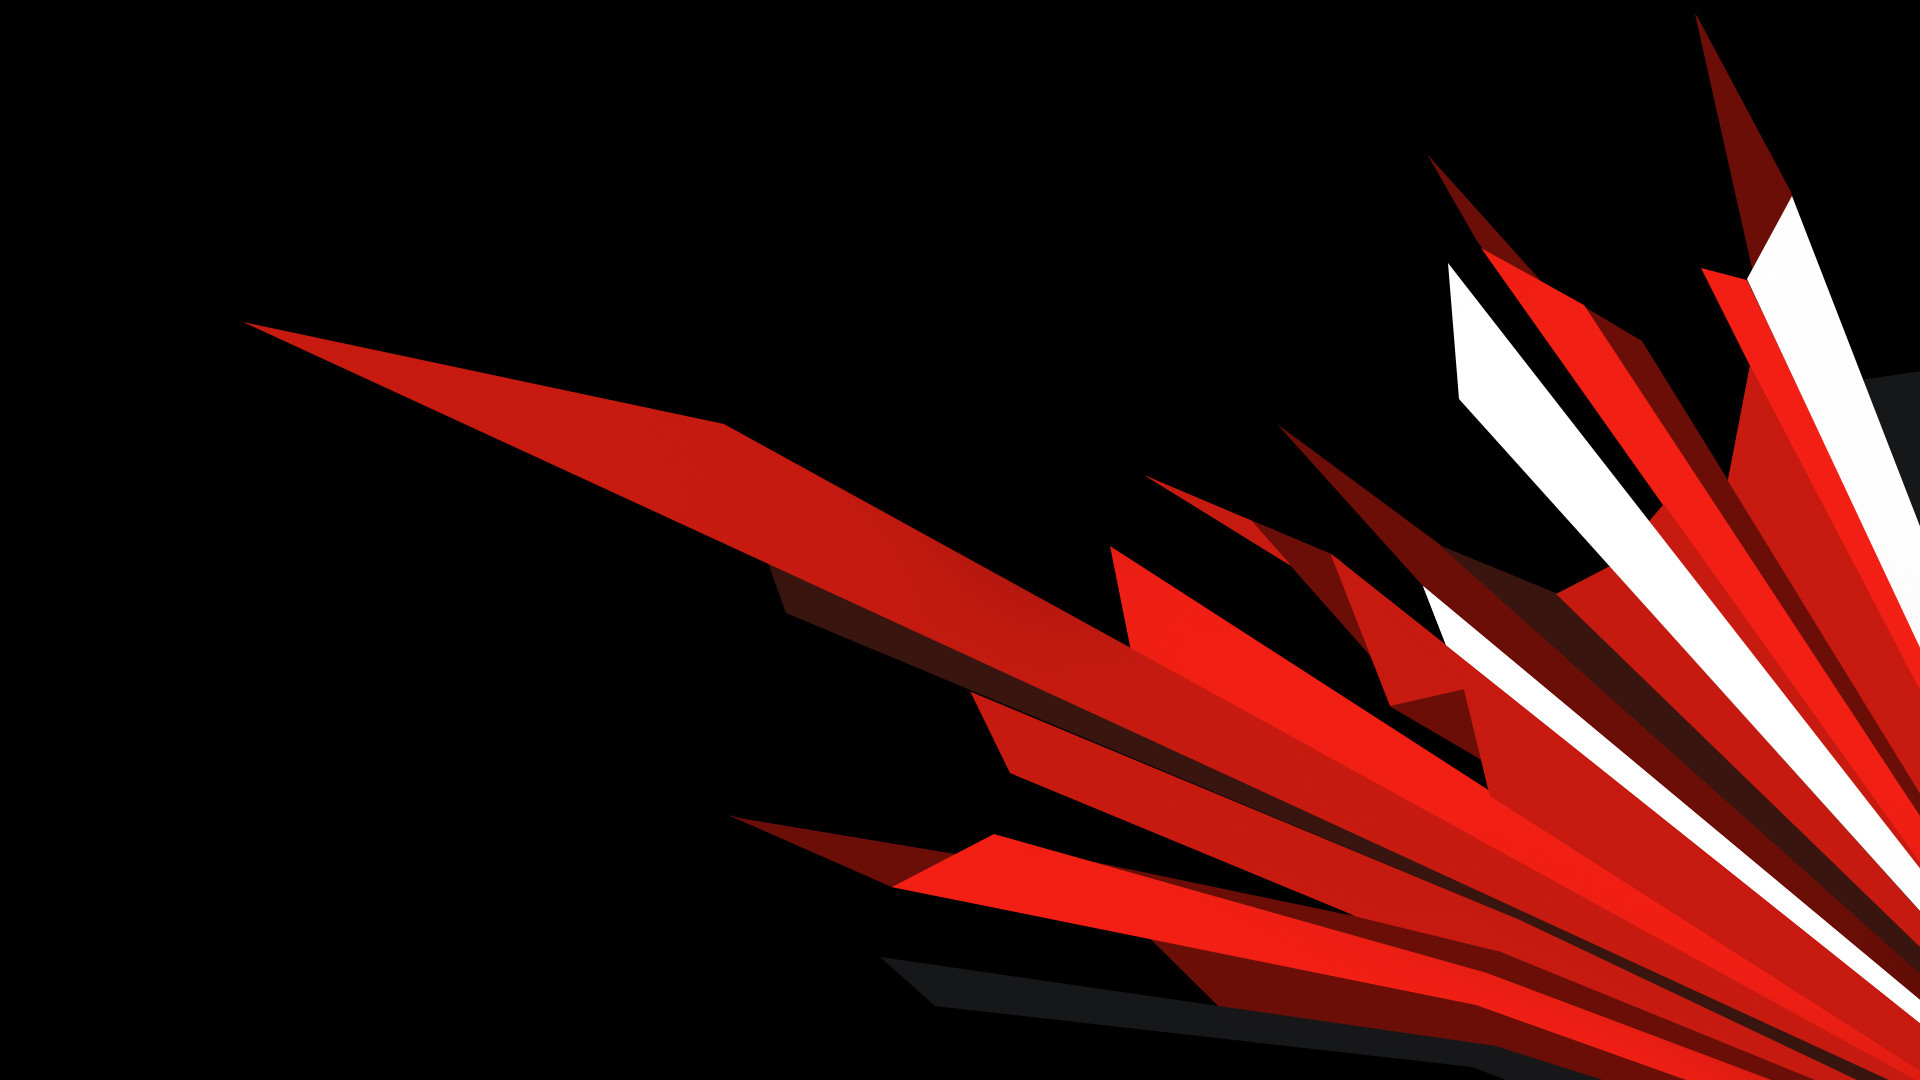 1920x1080 ... Asus Rog Wallpaper Images of Rog Inspired By Psucow - #SC ...